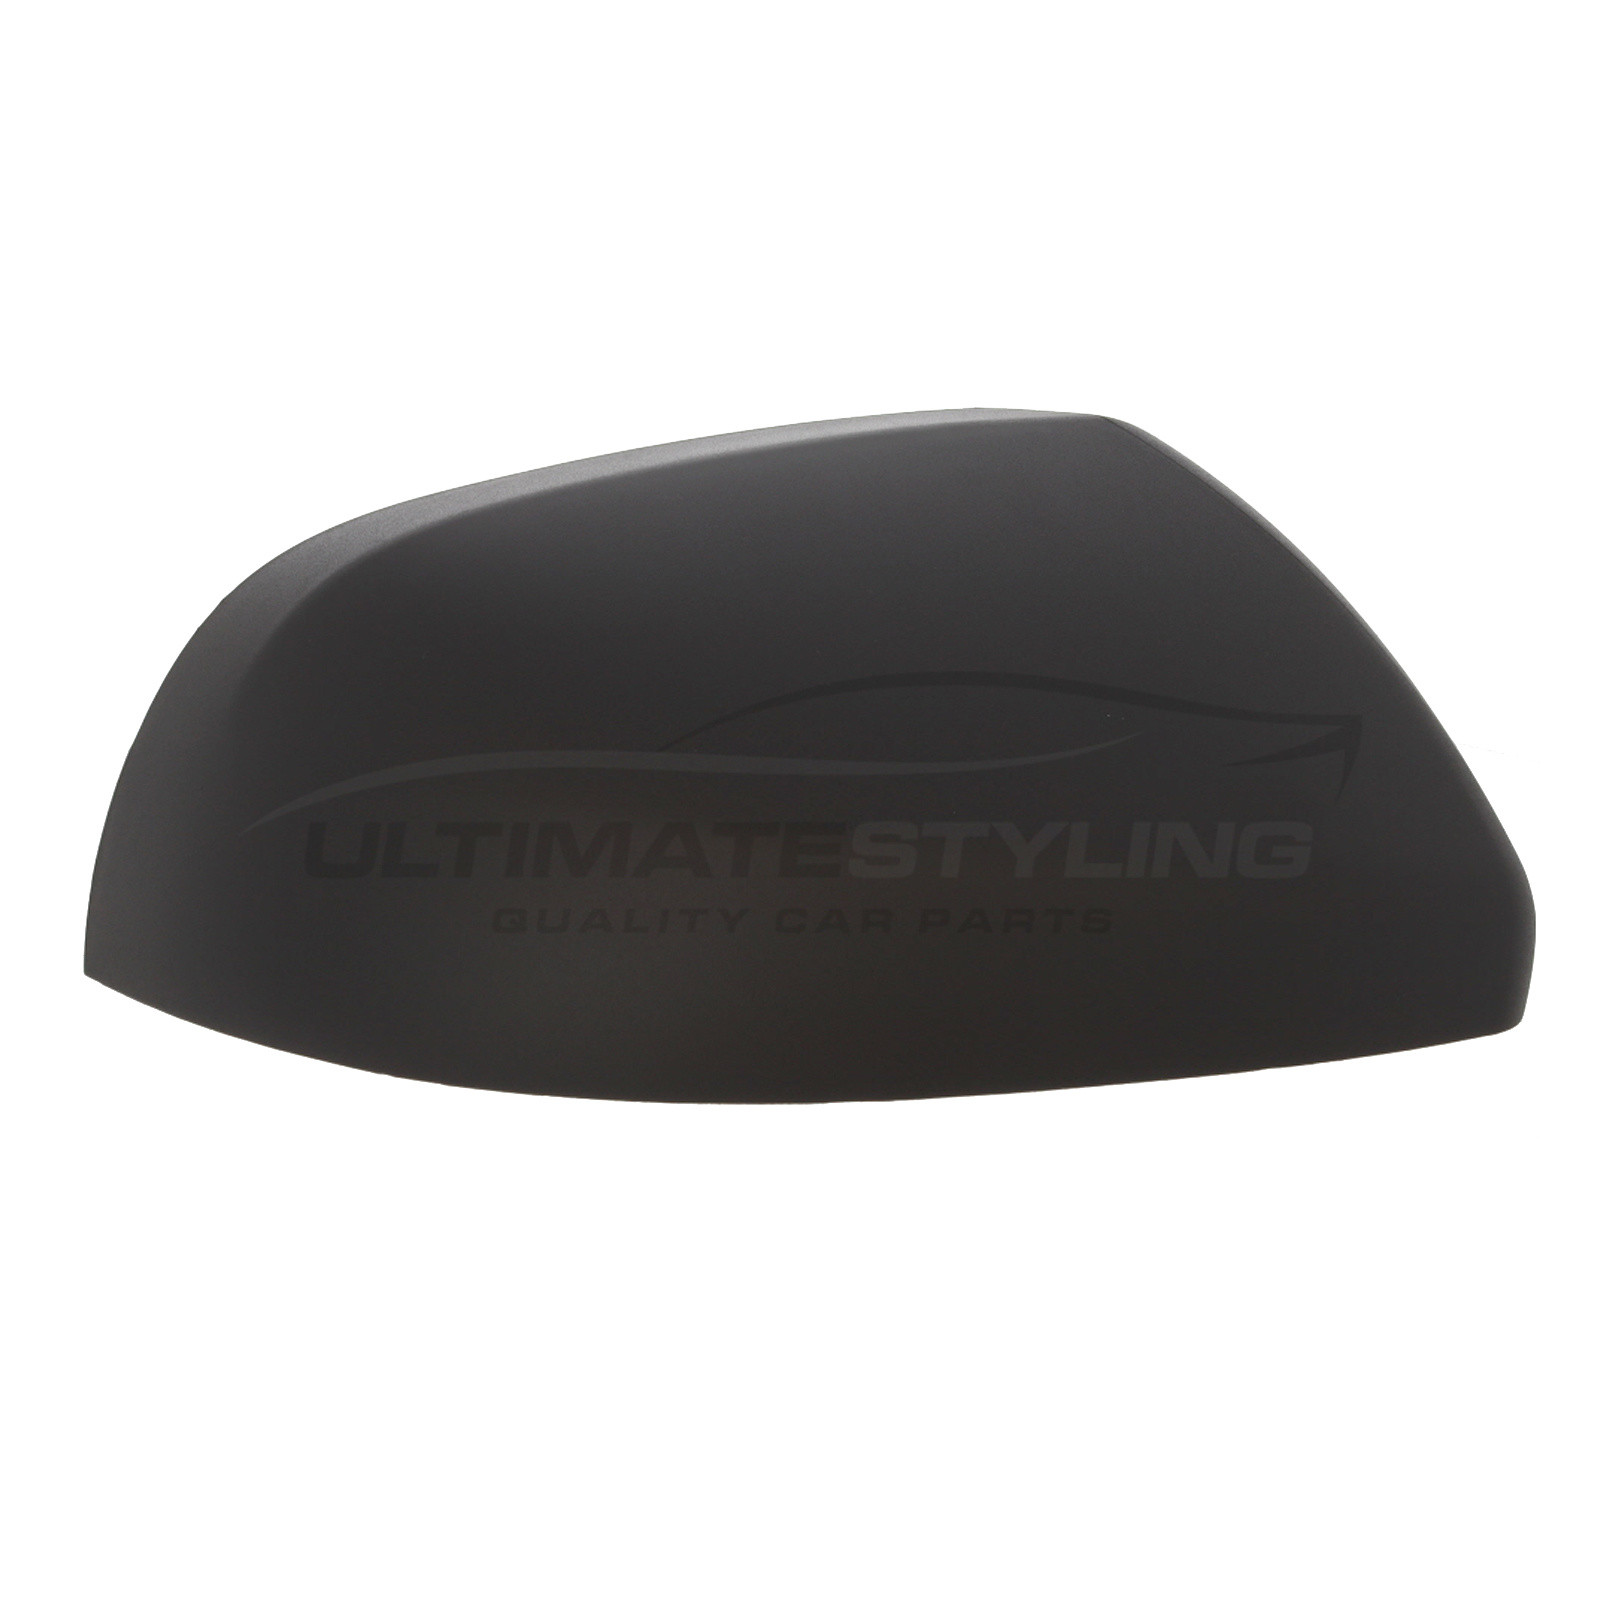 Mercedes Benz Vito Wing Mirror Cover - Drivers Side (RH) - Black